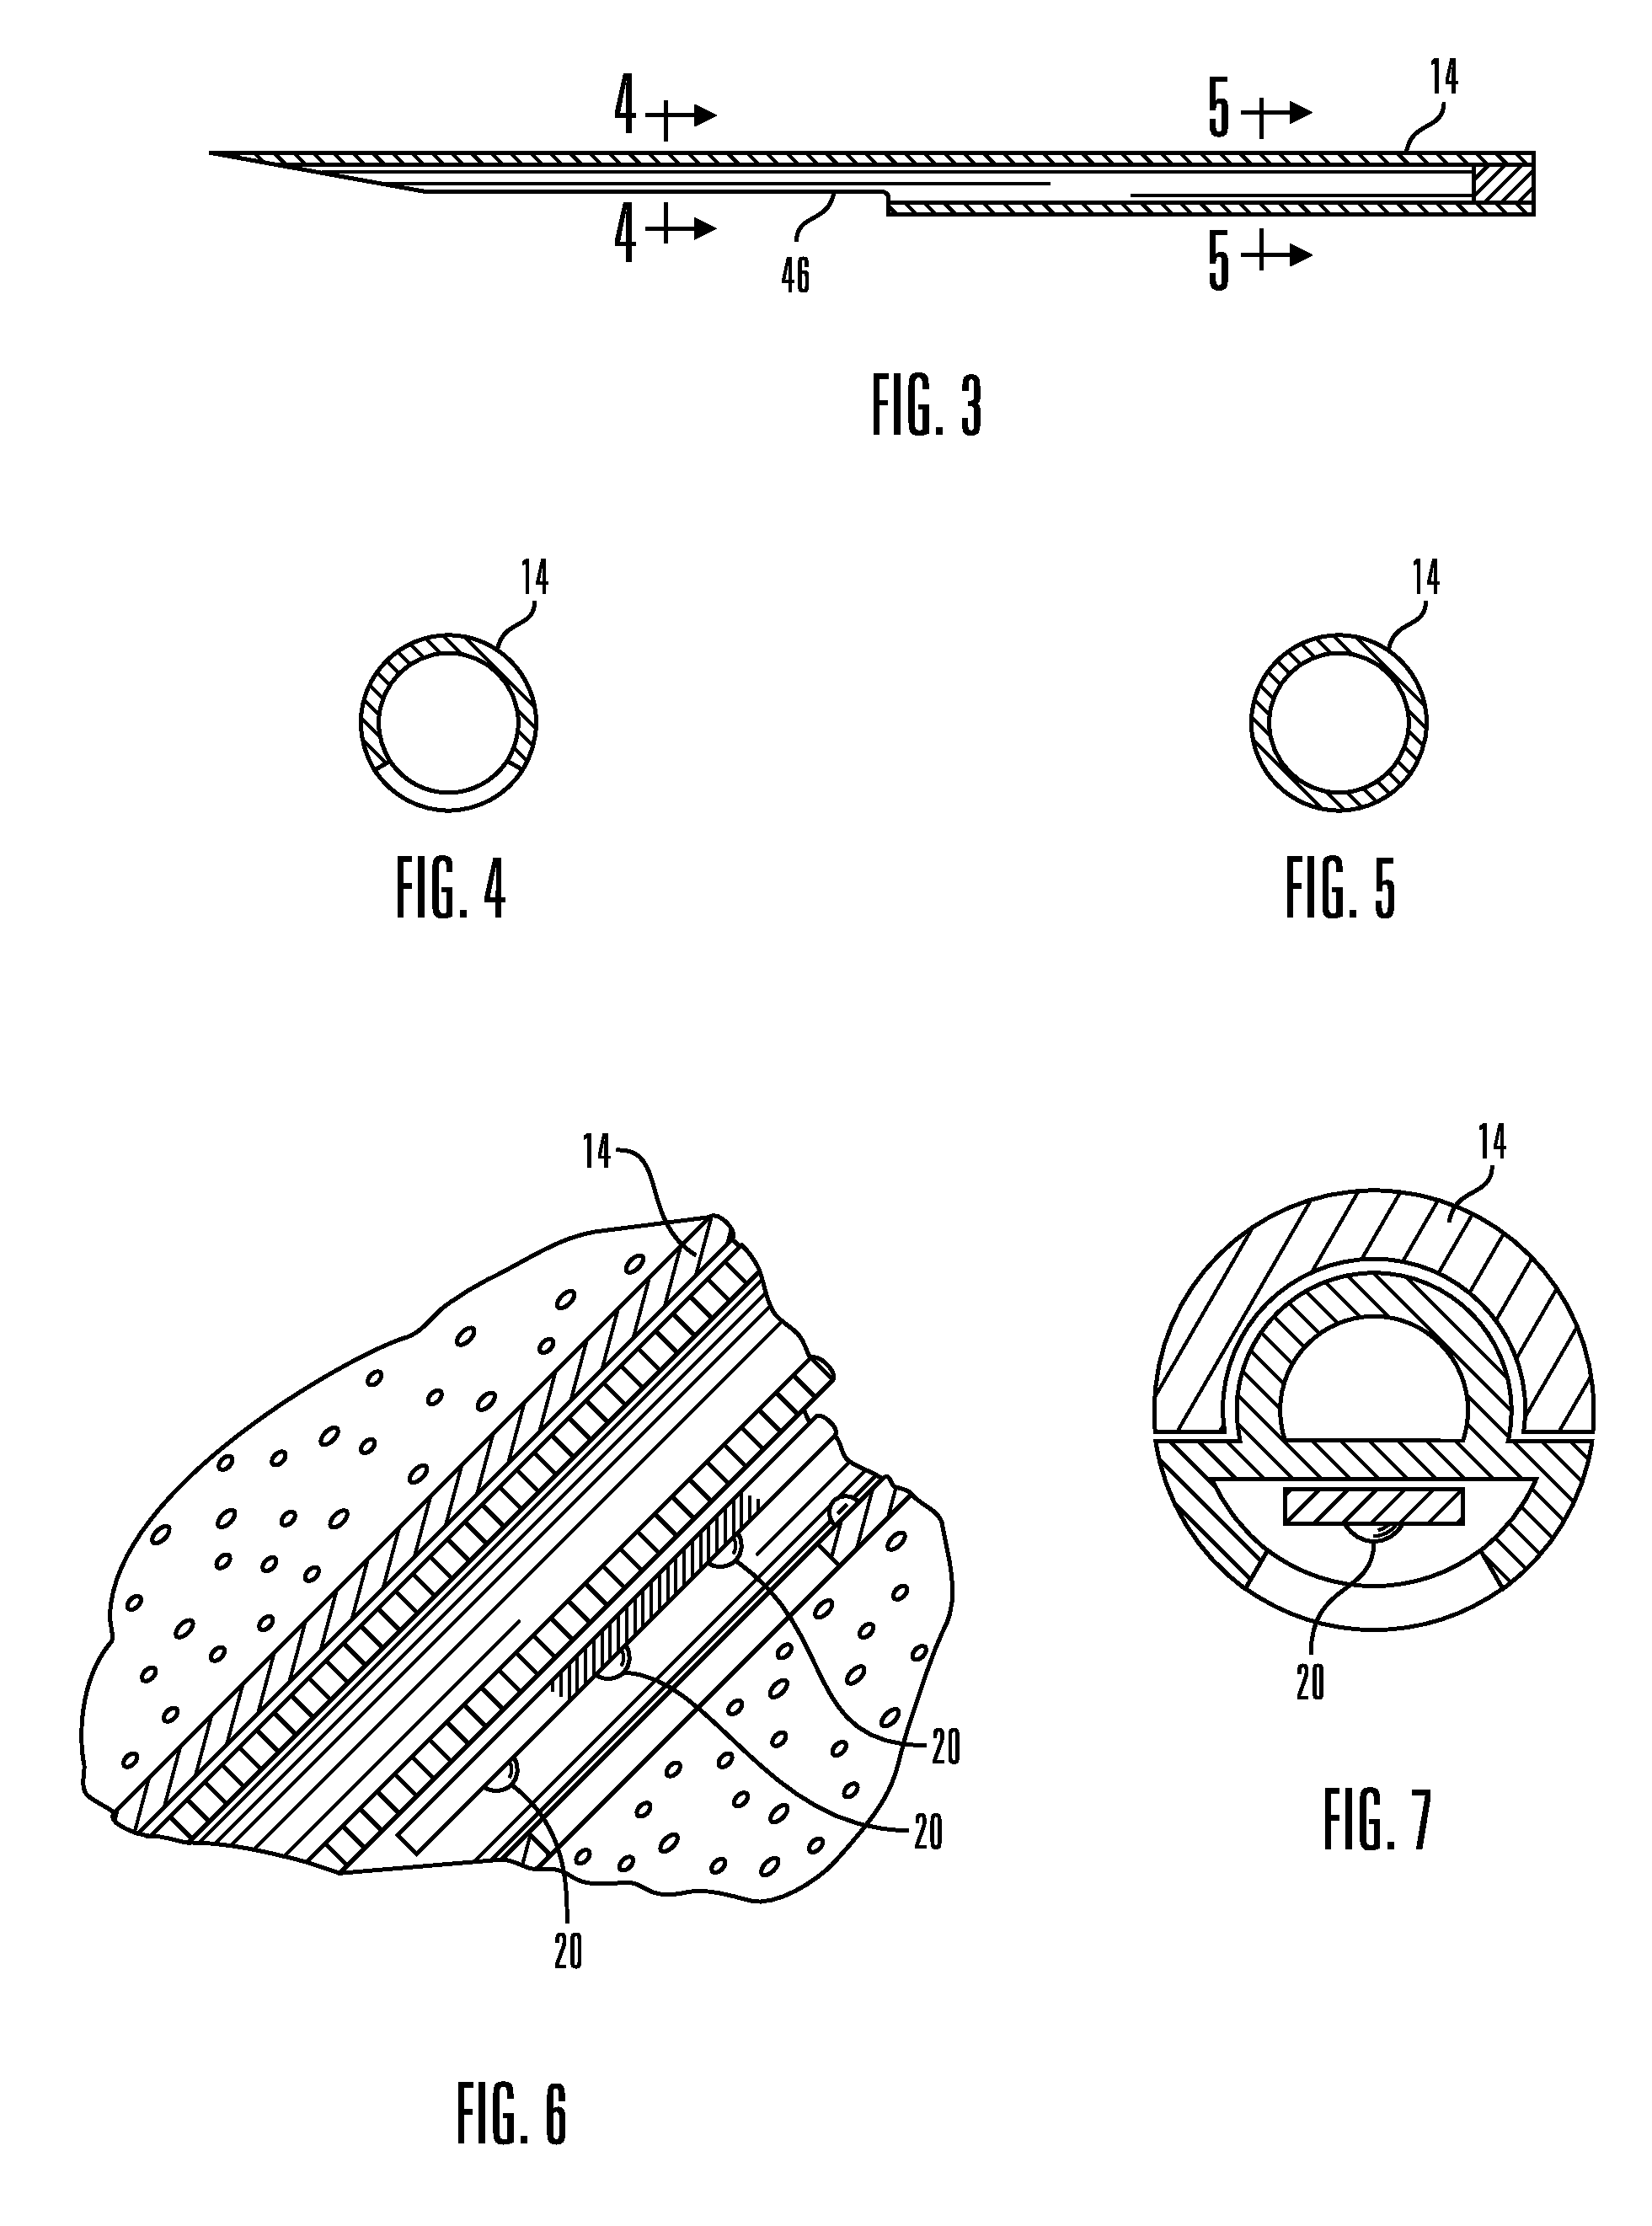 System and methods for calibrating physiological characteristic sensors